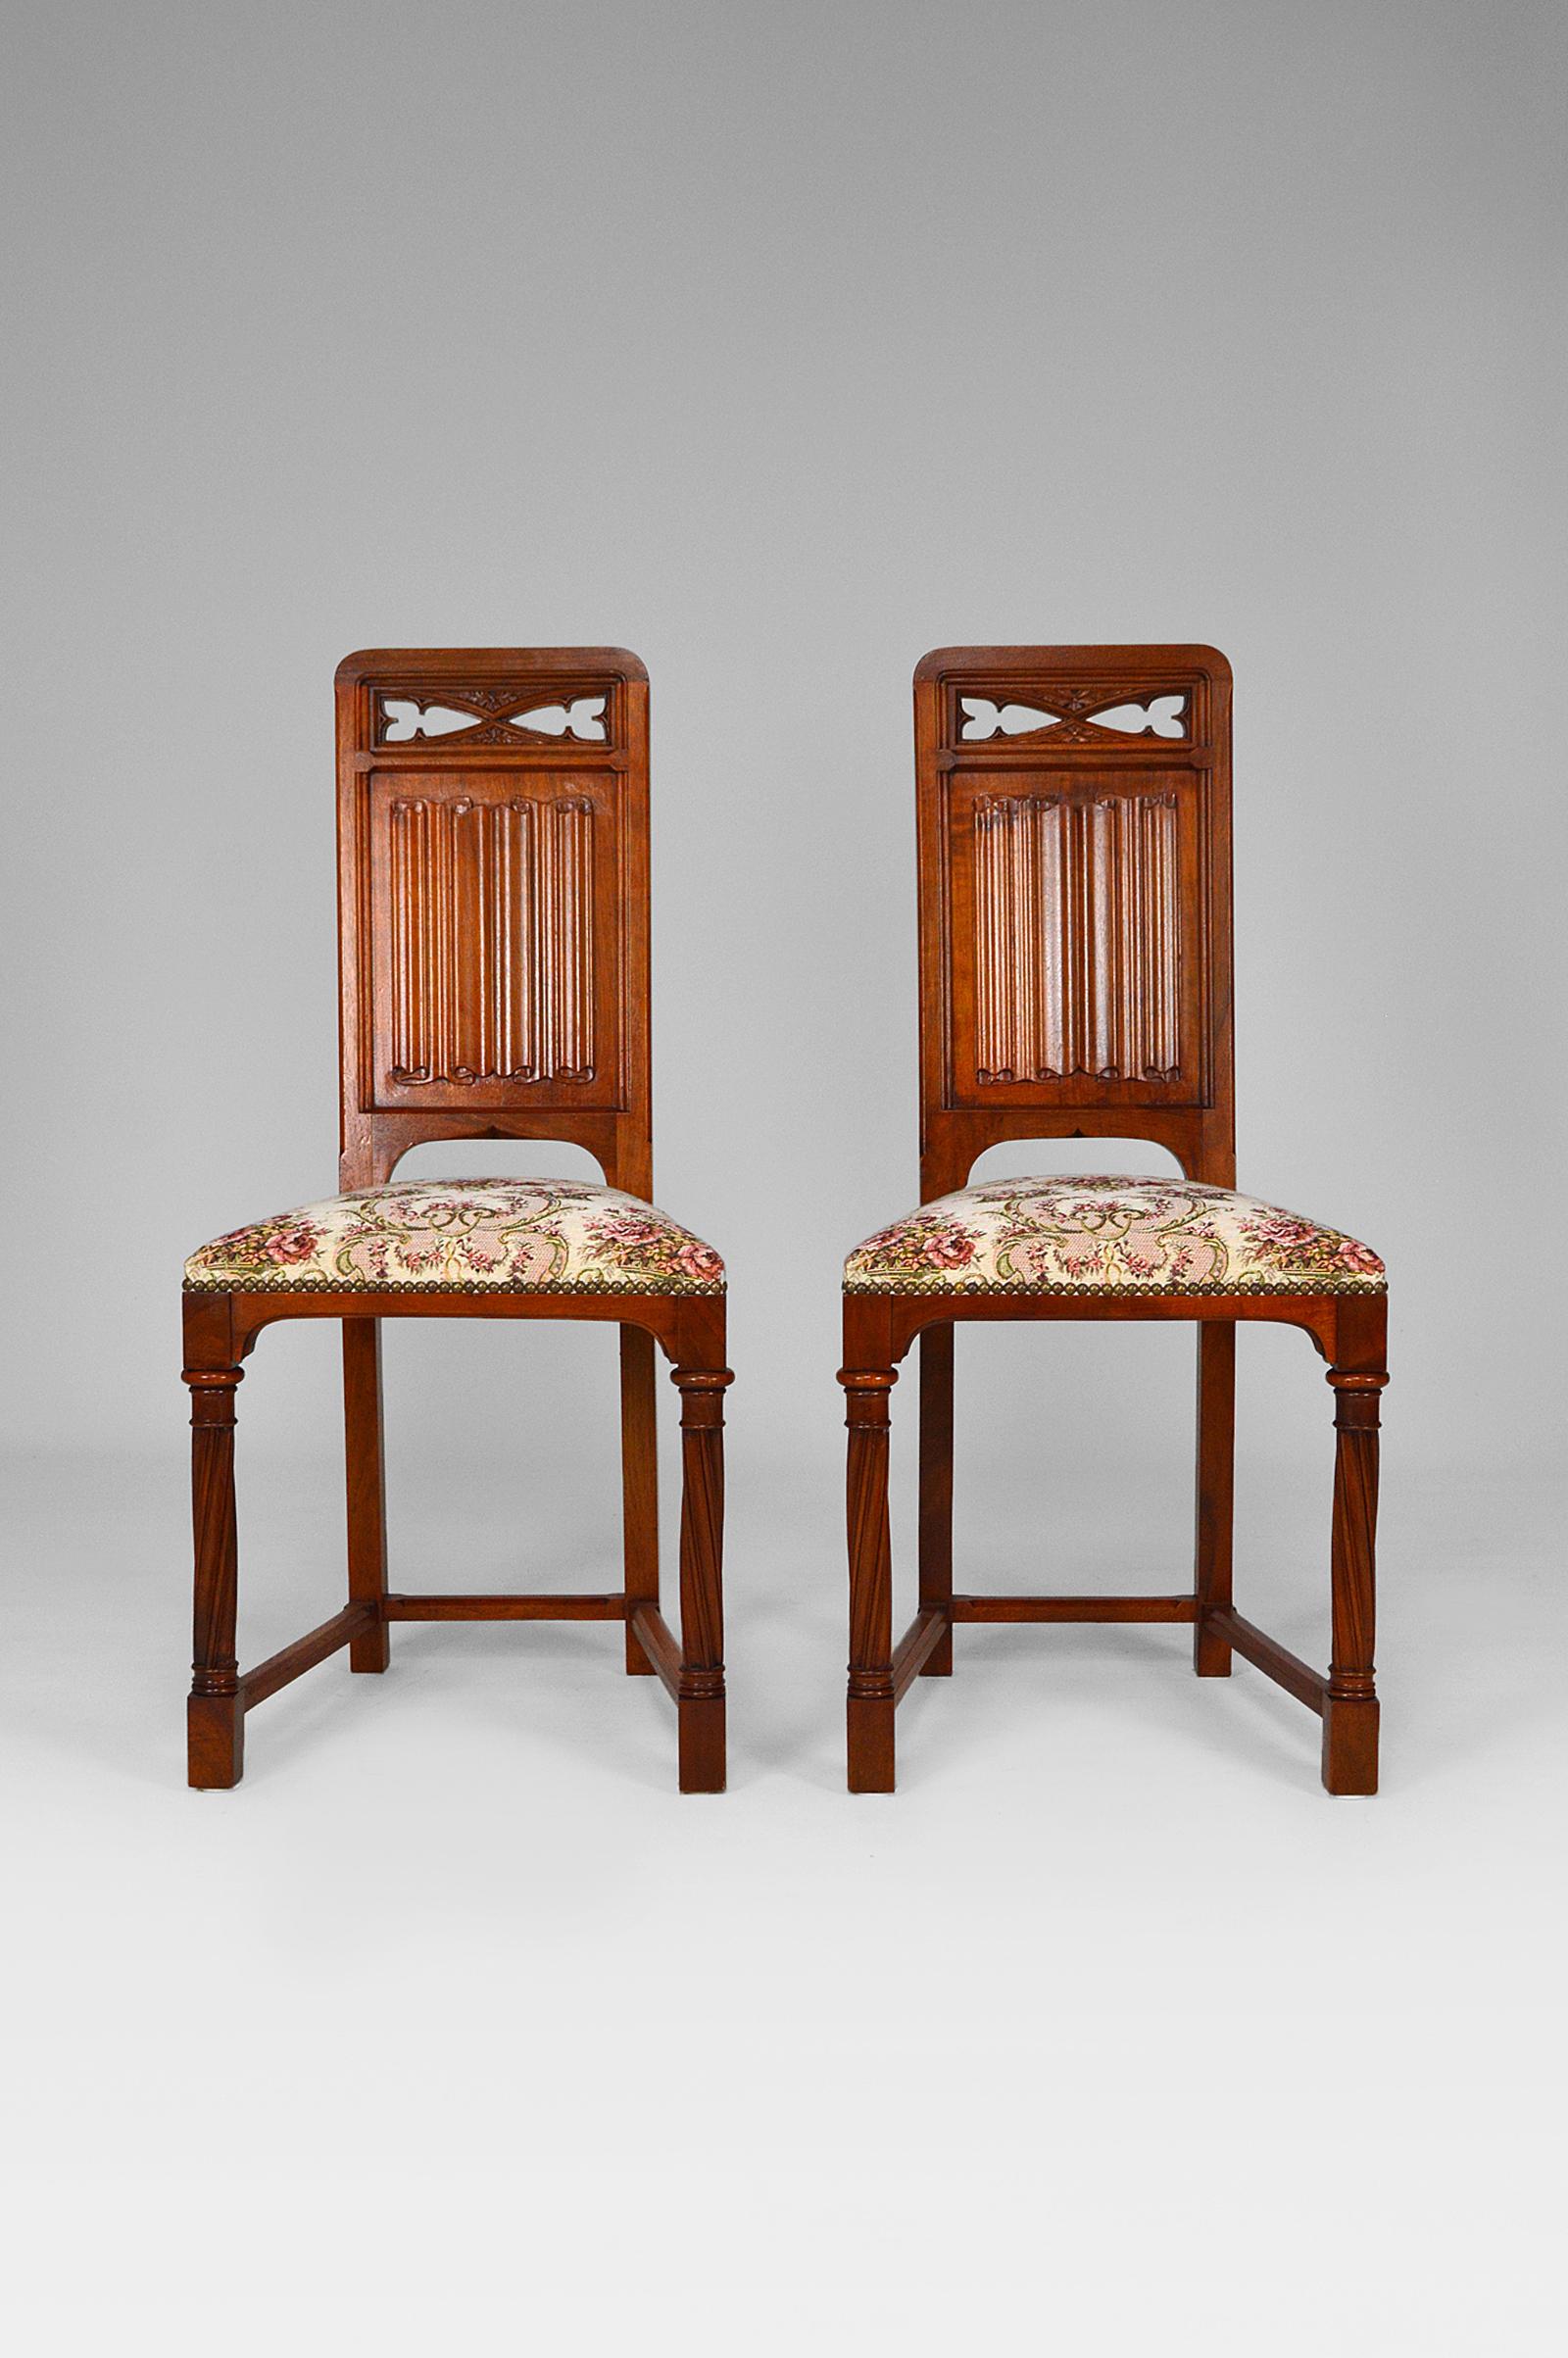 Gothic Revival, France, circa 1890.
Pair of chairs in carved walnut.
Folder carved with scrolls.
In good condition: Chassis in perfect condition, seat fabrics in good condition.